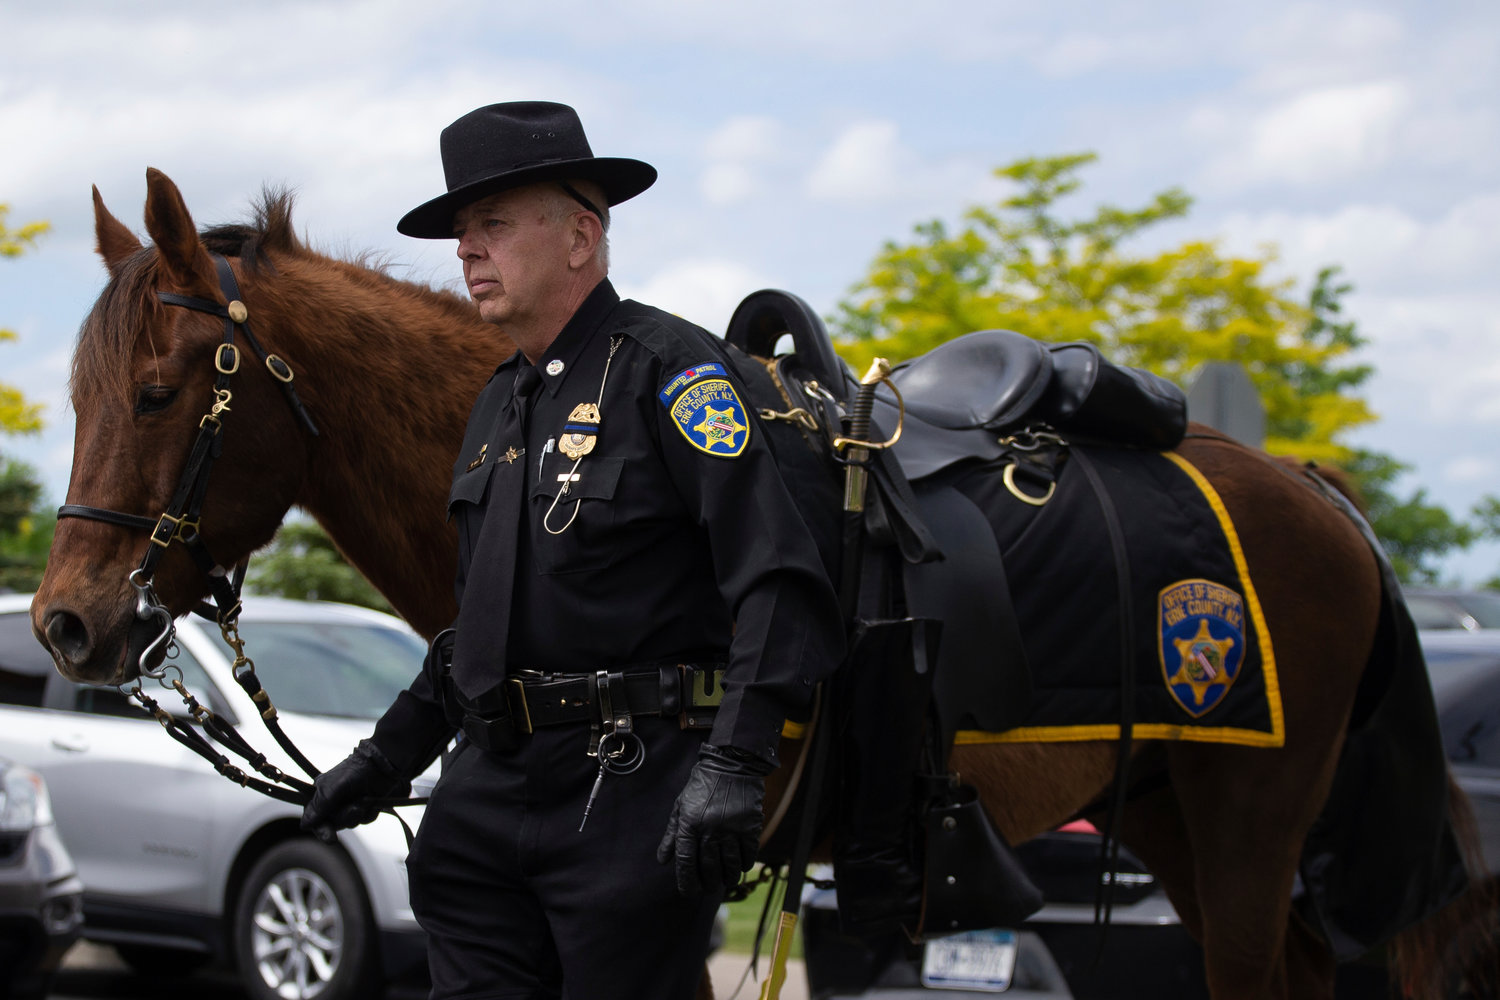 Capt. Wayne Wolfe, with the Erie County Sheriff's Mounted Reserve Unit, leads a riderless horse before the funeral service for Aaron Salter Jr. at The Chapel at Crosspoint on Wednesday, May 25, 2022, in Getzville, N.Y. Salter Jr. was killed in the Buffalo supermarket shooting on May 14. (AP Photo/Joshua Bessex)